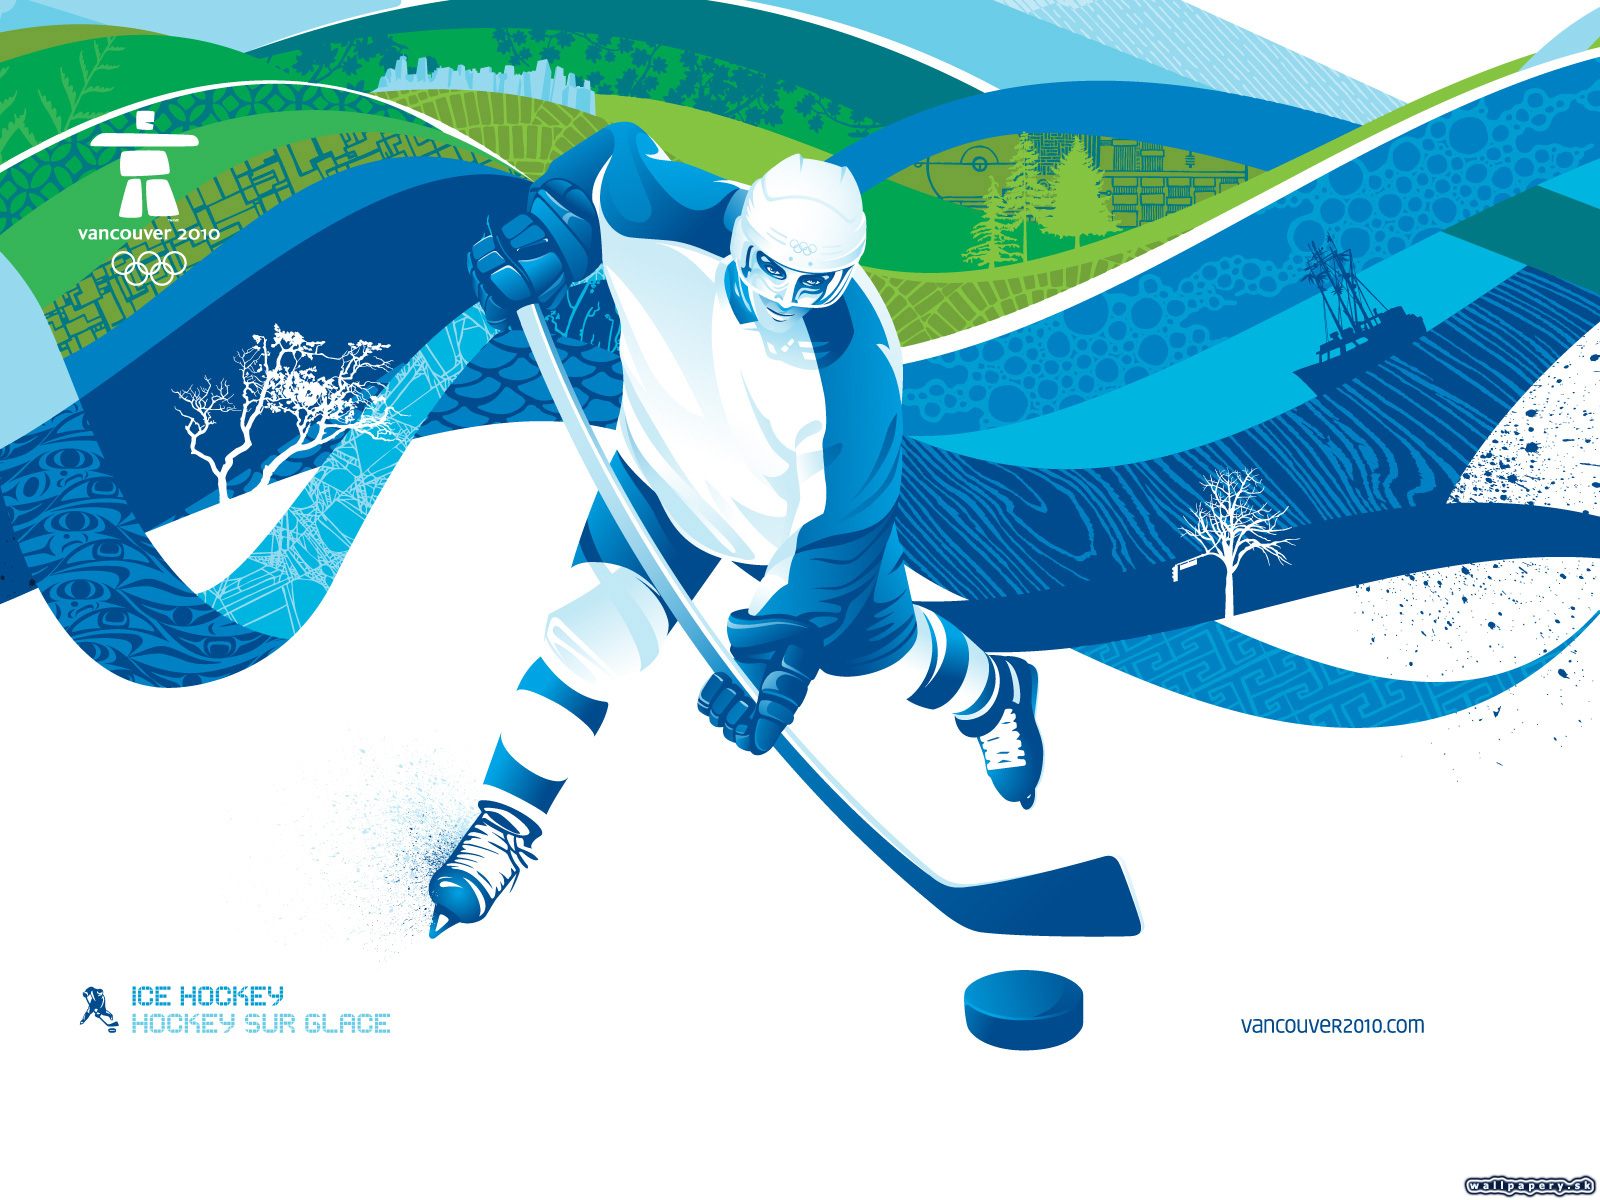 Vancouver 2010 - The Official Video Game of the Olympic Winter Games - wallpaper 17